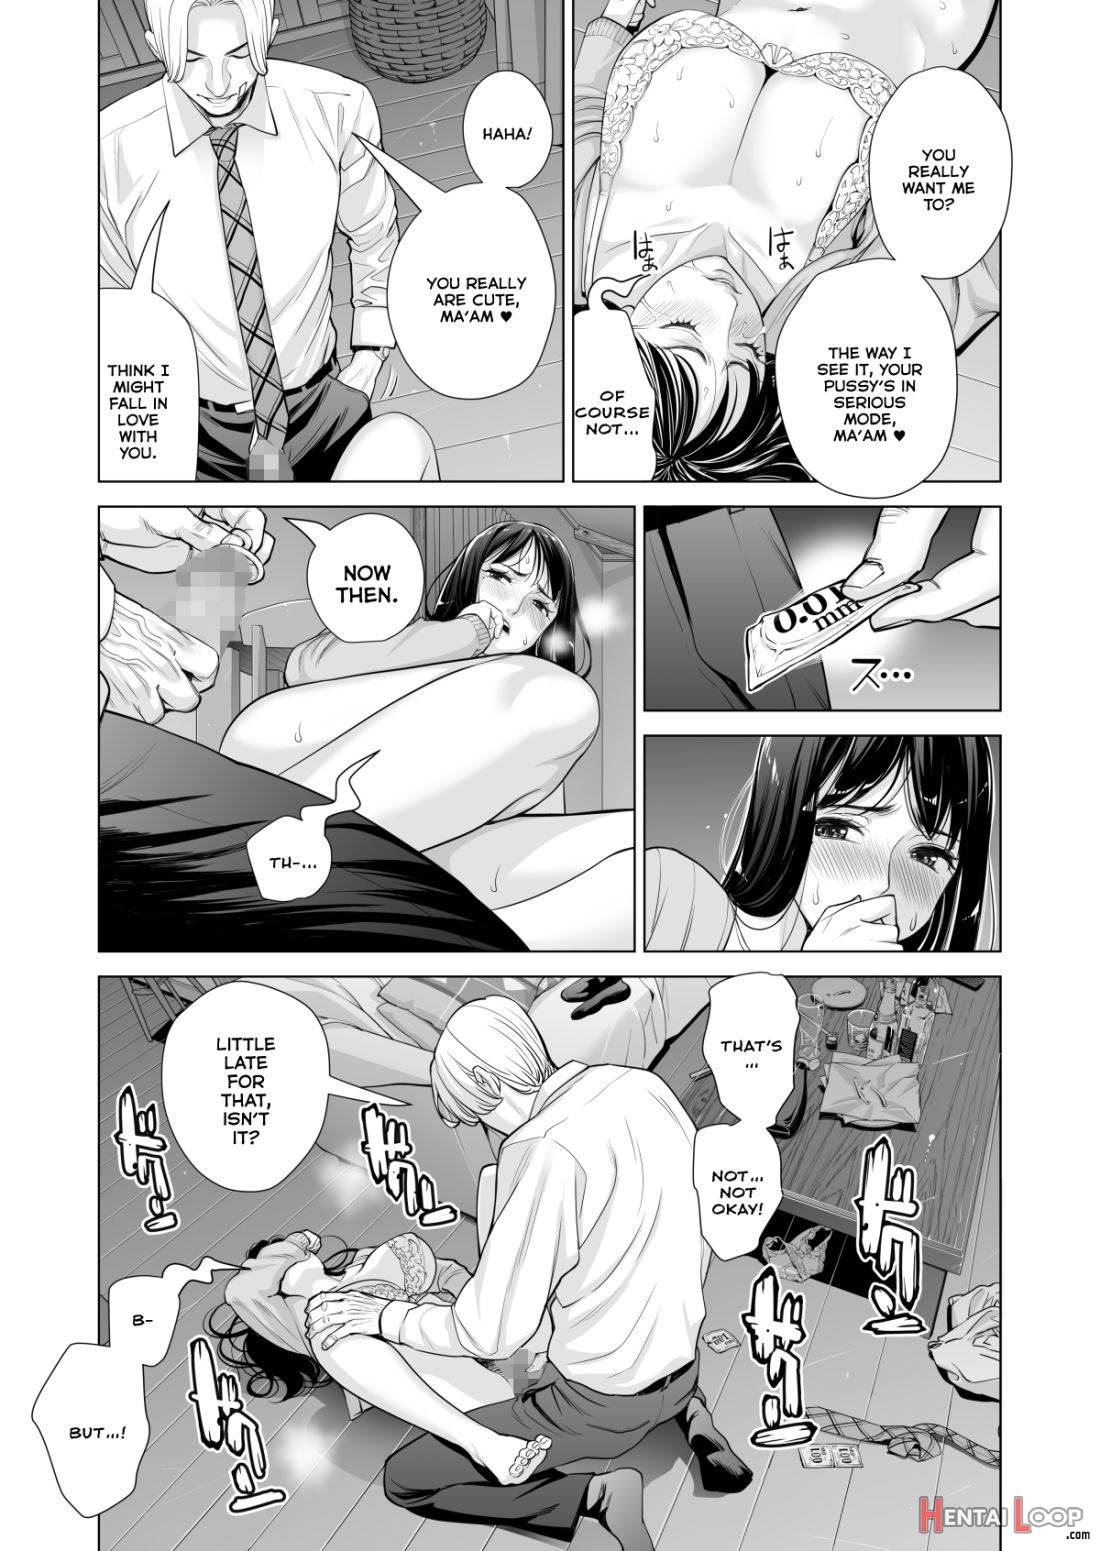 Tsukiyo no Midare Zake (Kouhen) Moonlit Intoxication ~ A Housewife Stolen by a Coworker Besides her Blackout Drunk Husband ~ Chapter 2 page 33